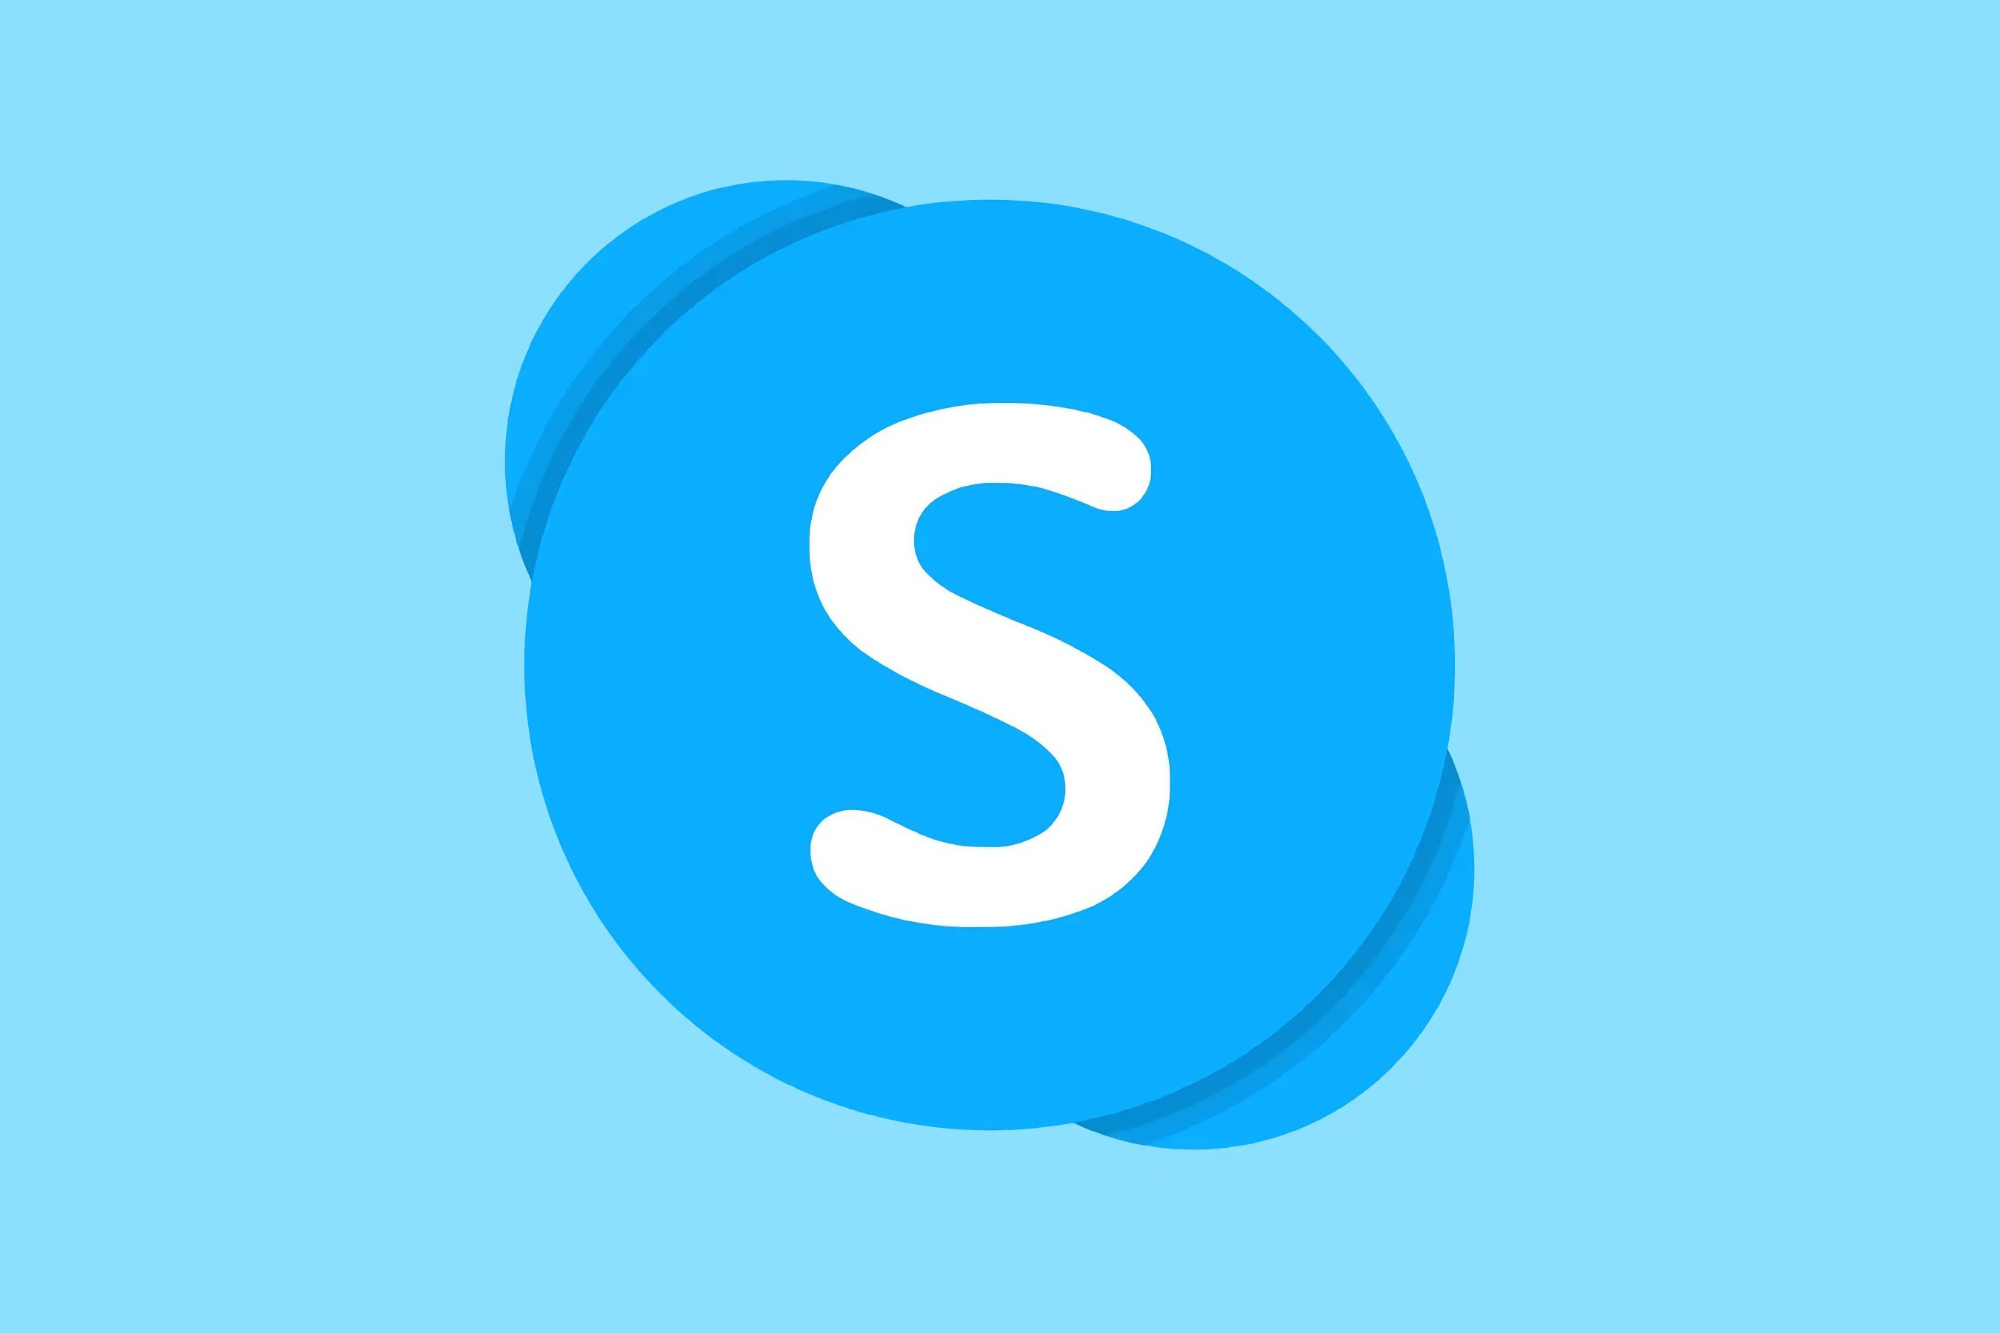 Skype introduces free calls from Ukraine and to Ukraine